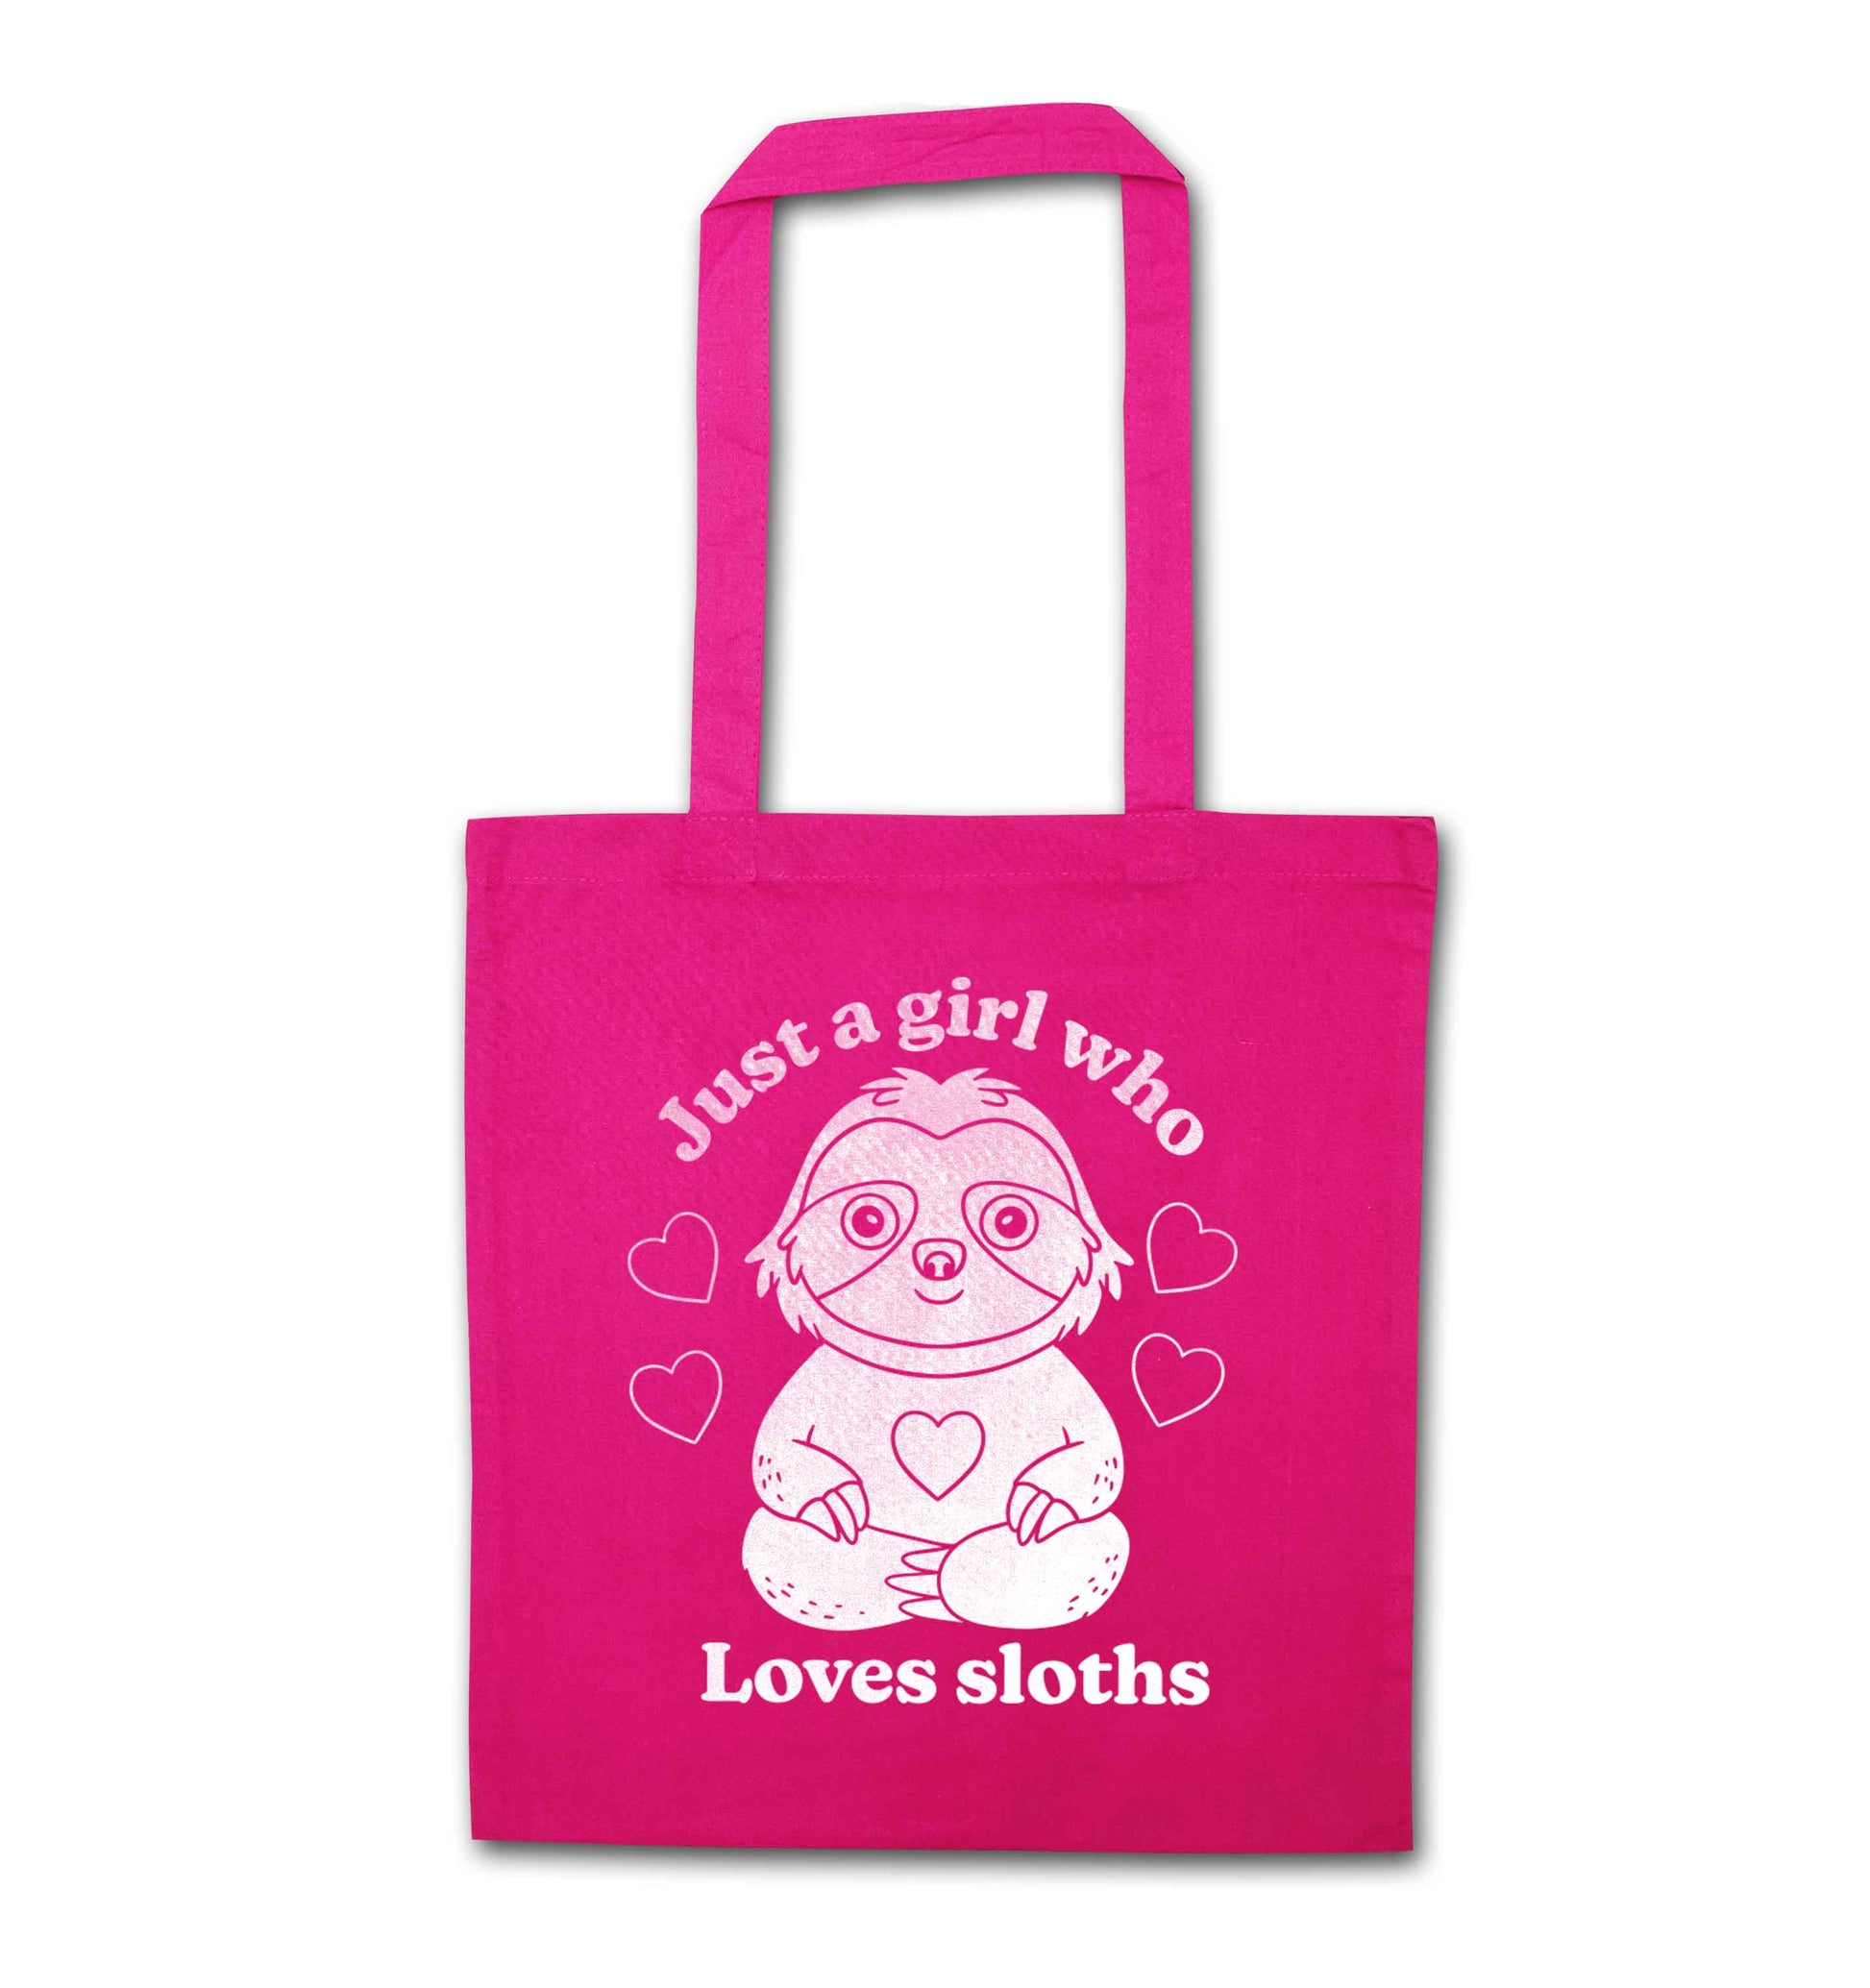 Just a girl who loves sloths pink tote bag